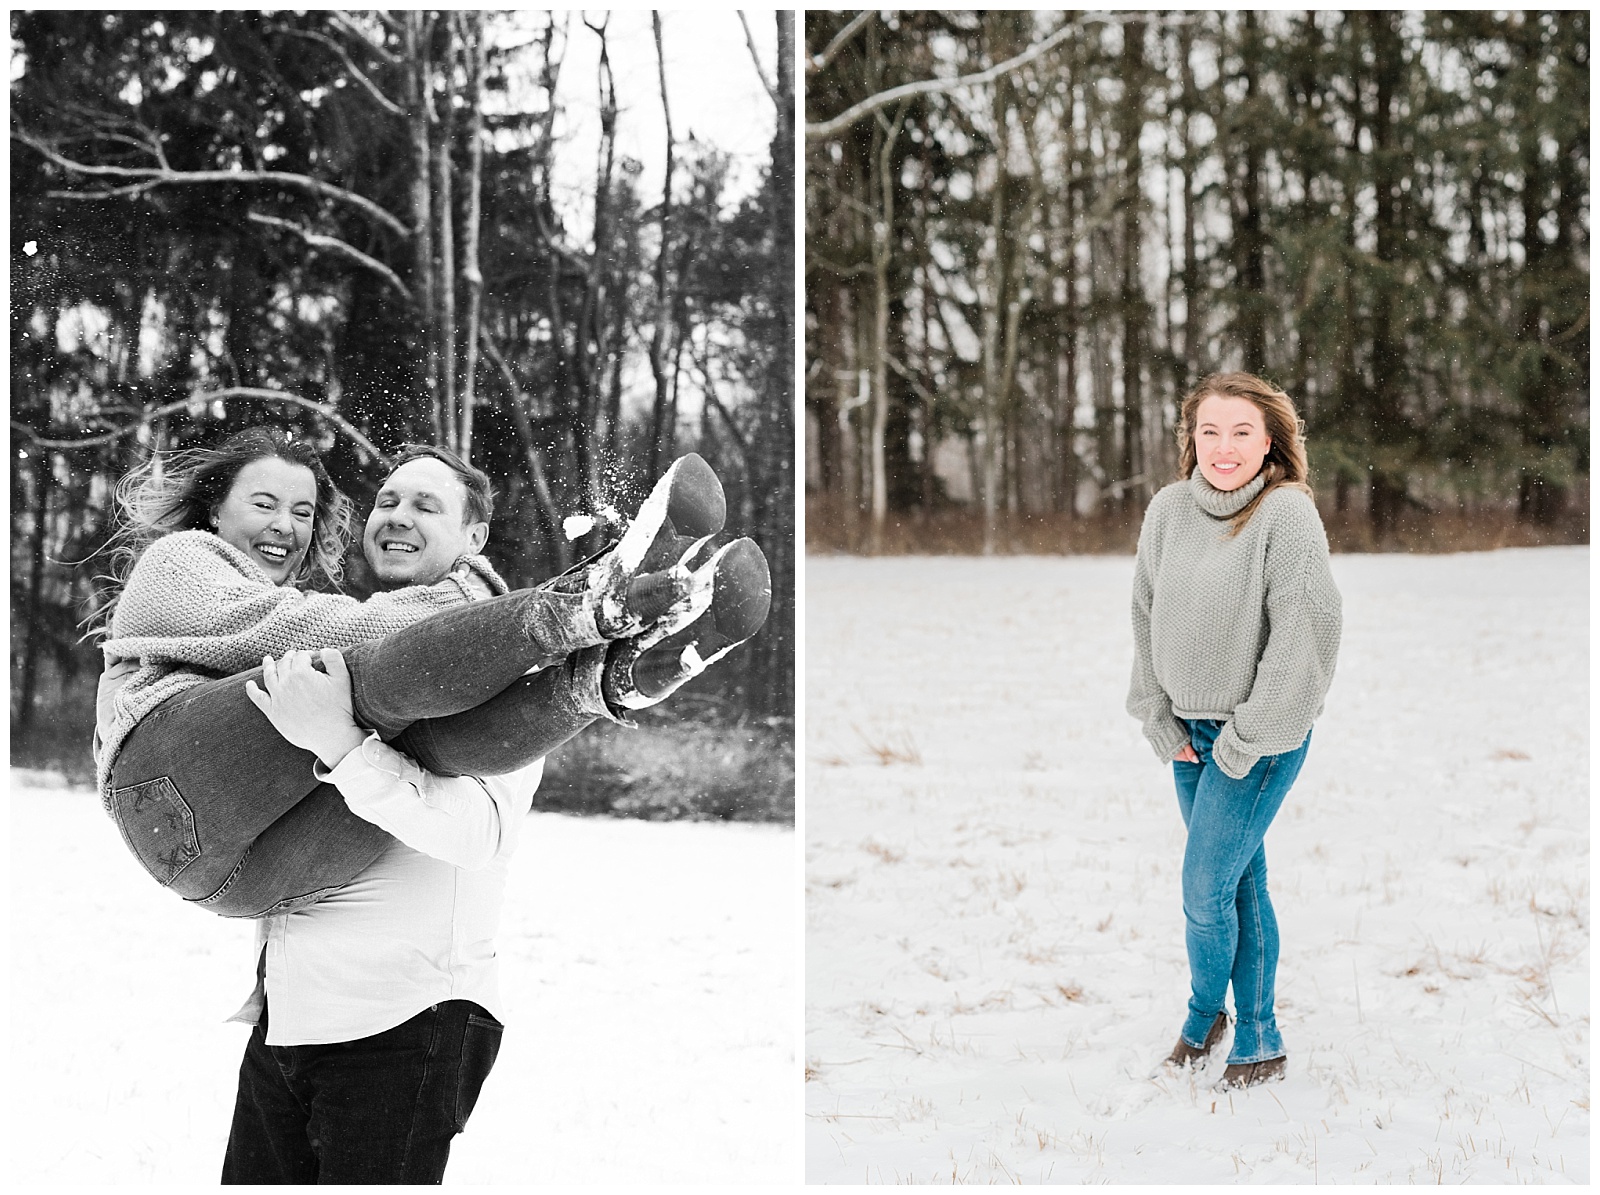 New Jersey Engagement Session, Snowy, Winter, Cozy, Session, Wedding Photographer, Cross Estate Gardens, Snow, Wintry, Light and Airy, Joyful